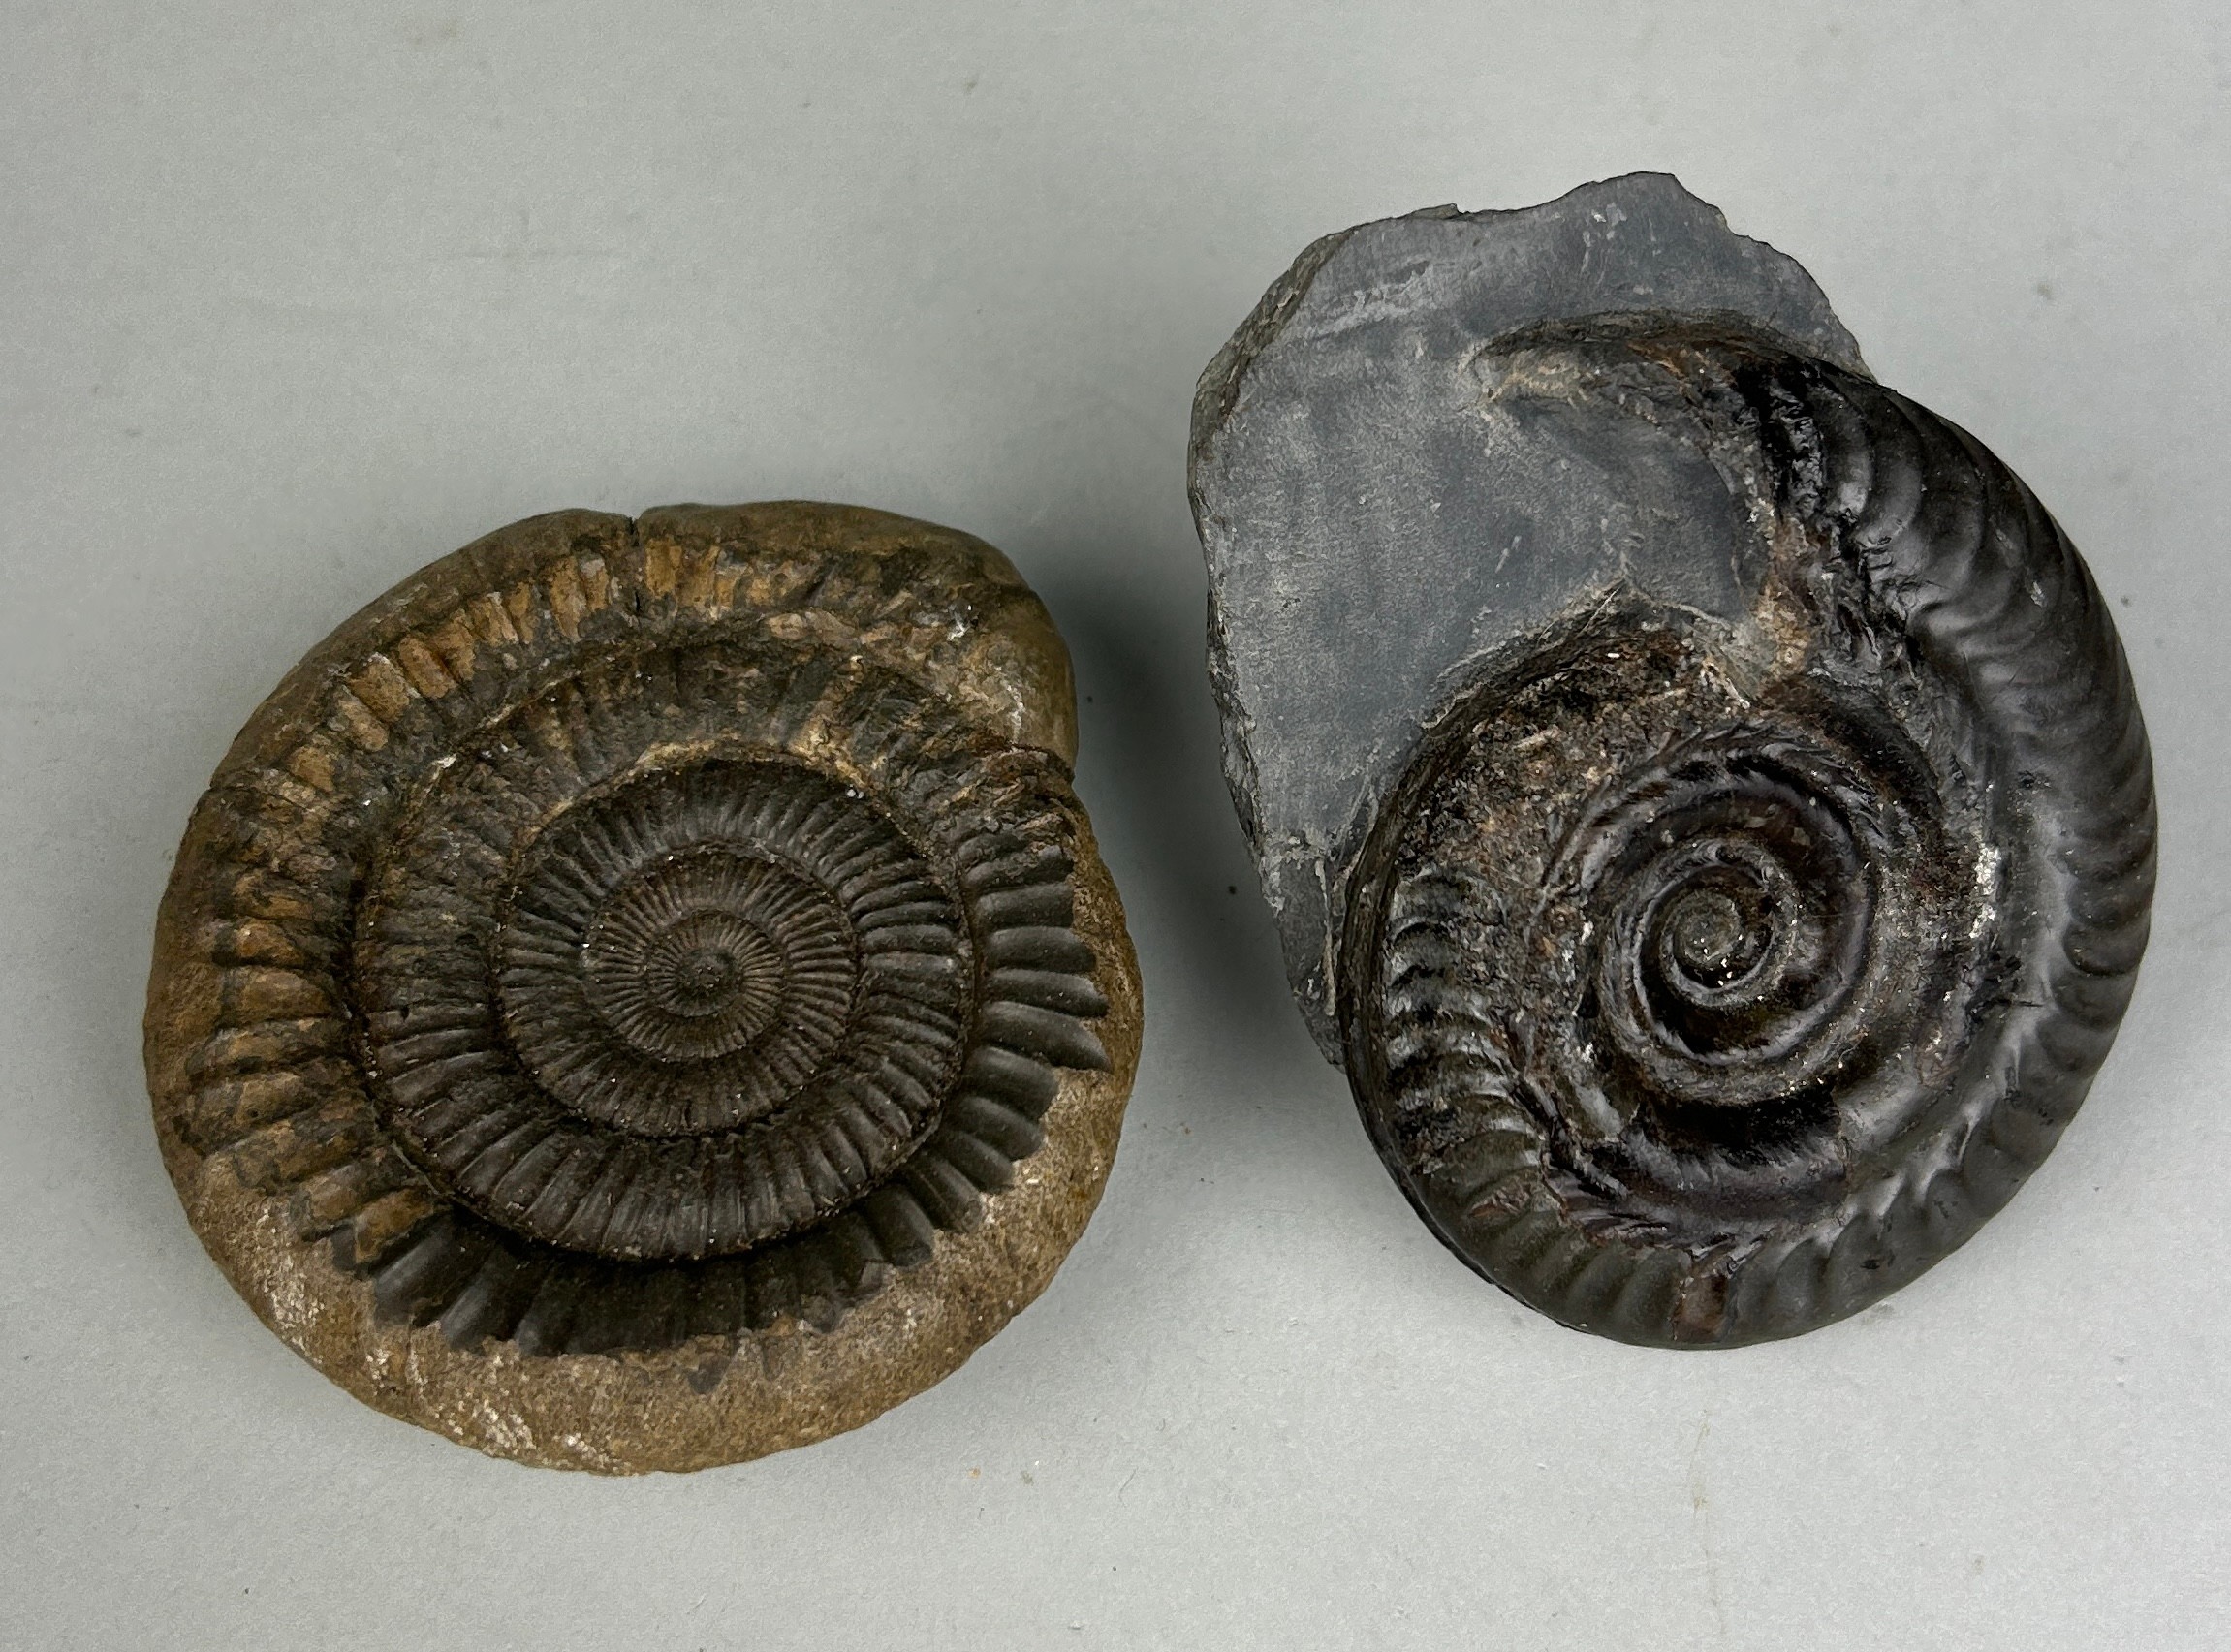 AMMONITE FOSSILS FROM WHITBY, YORKSHIRE A pair of ammonite fossils from Whitby, Yorkshire.